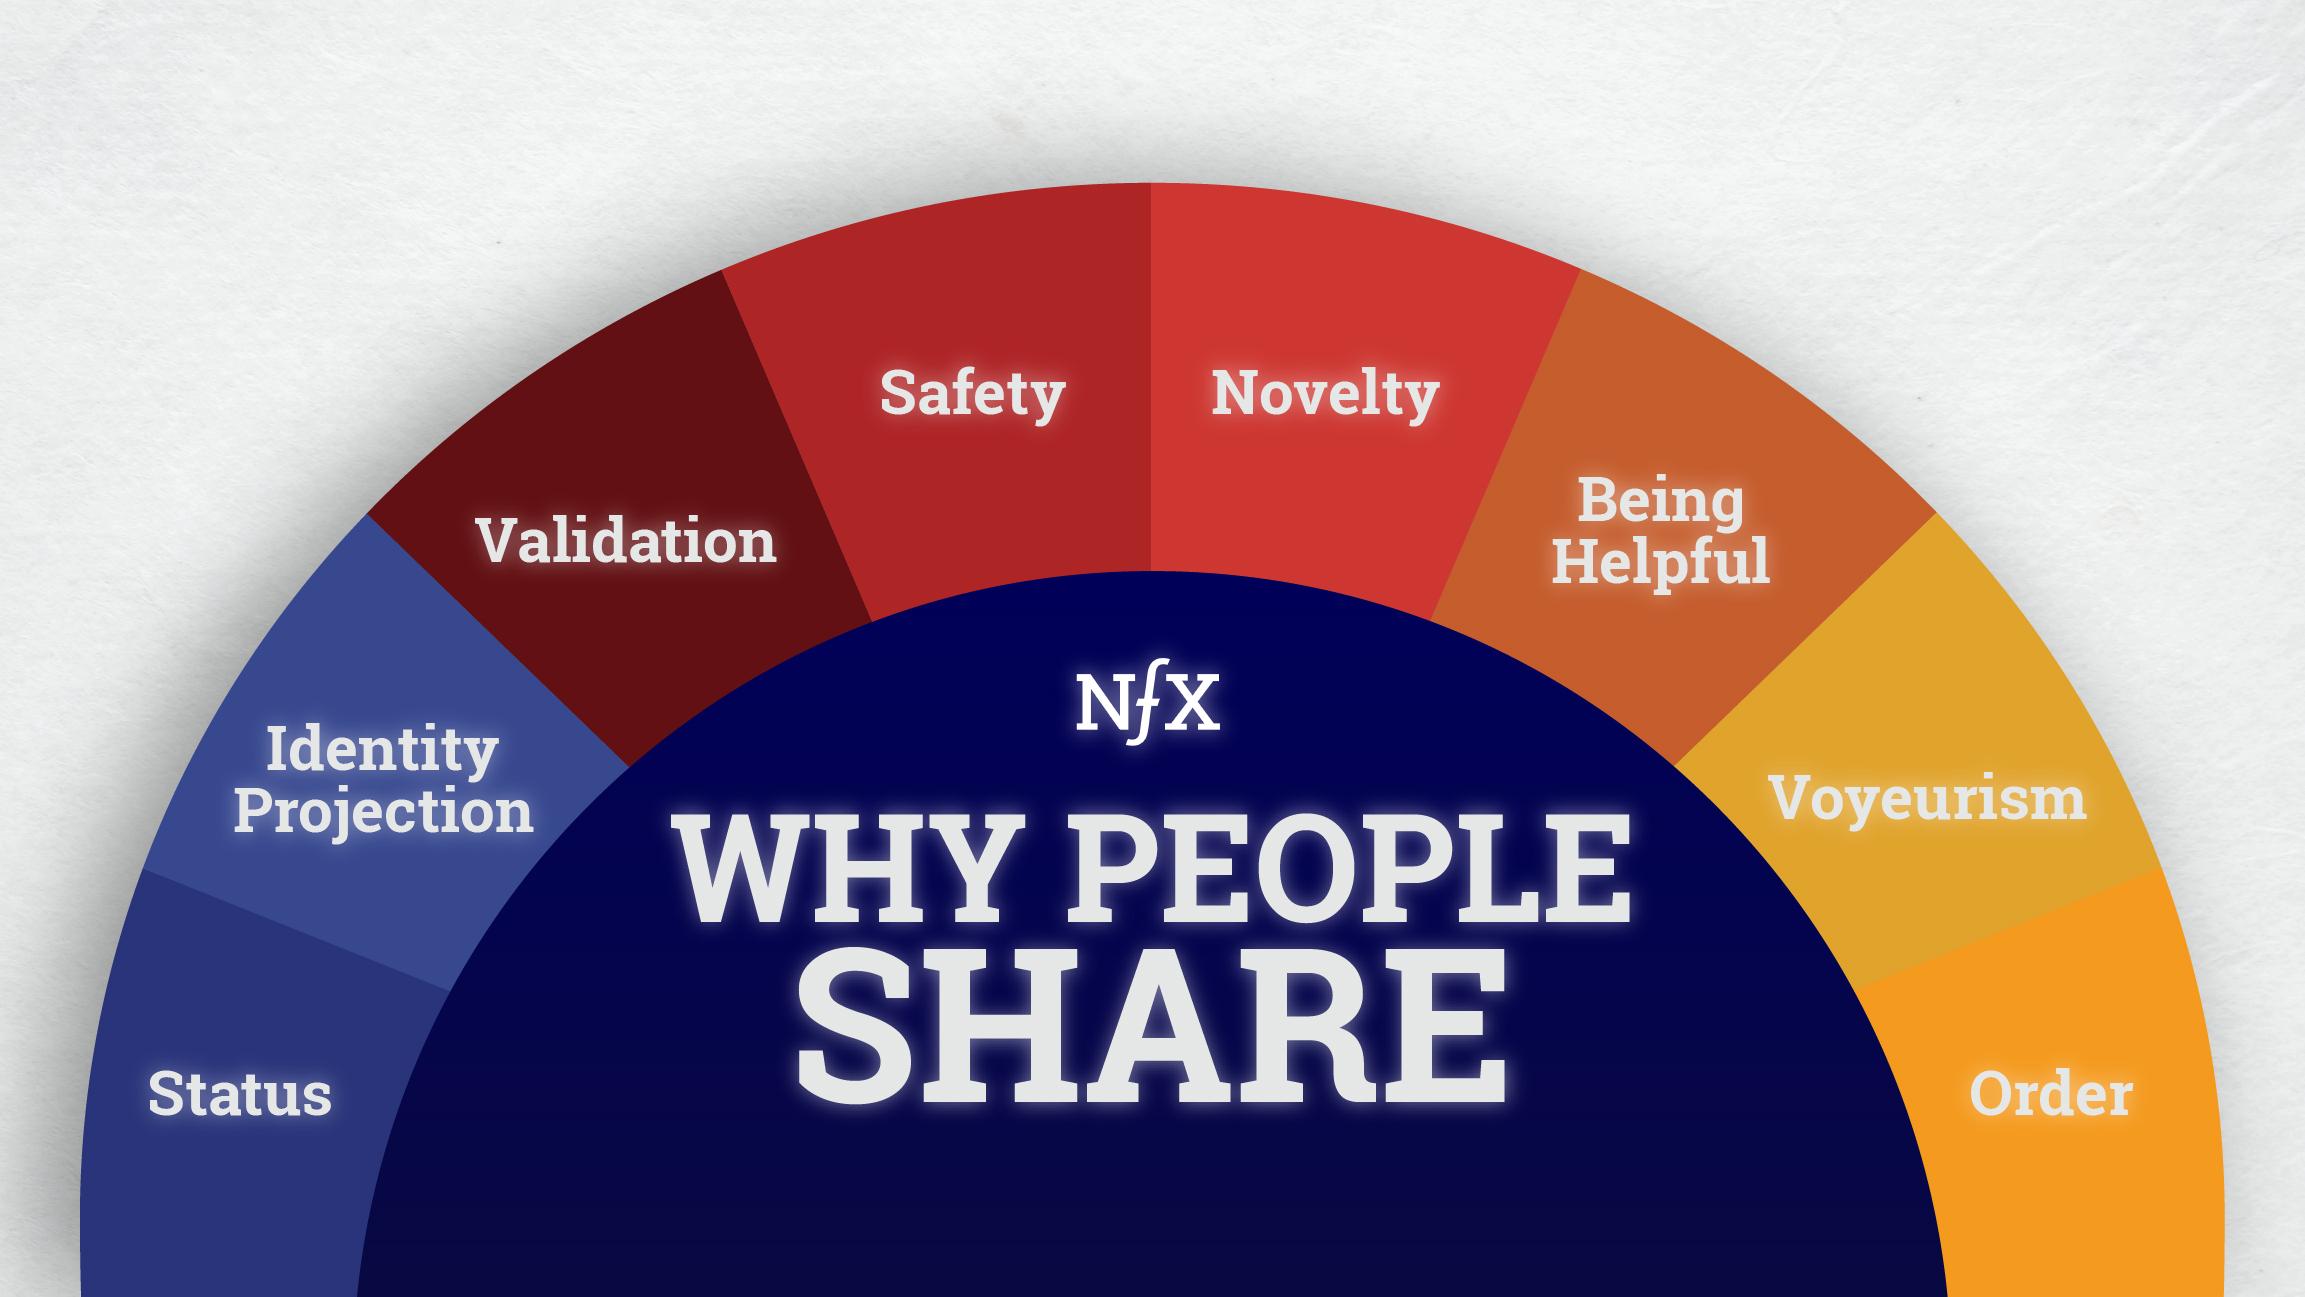 Why People Share: The Psychology Behind “Going Viral”